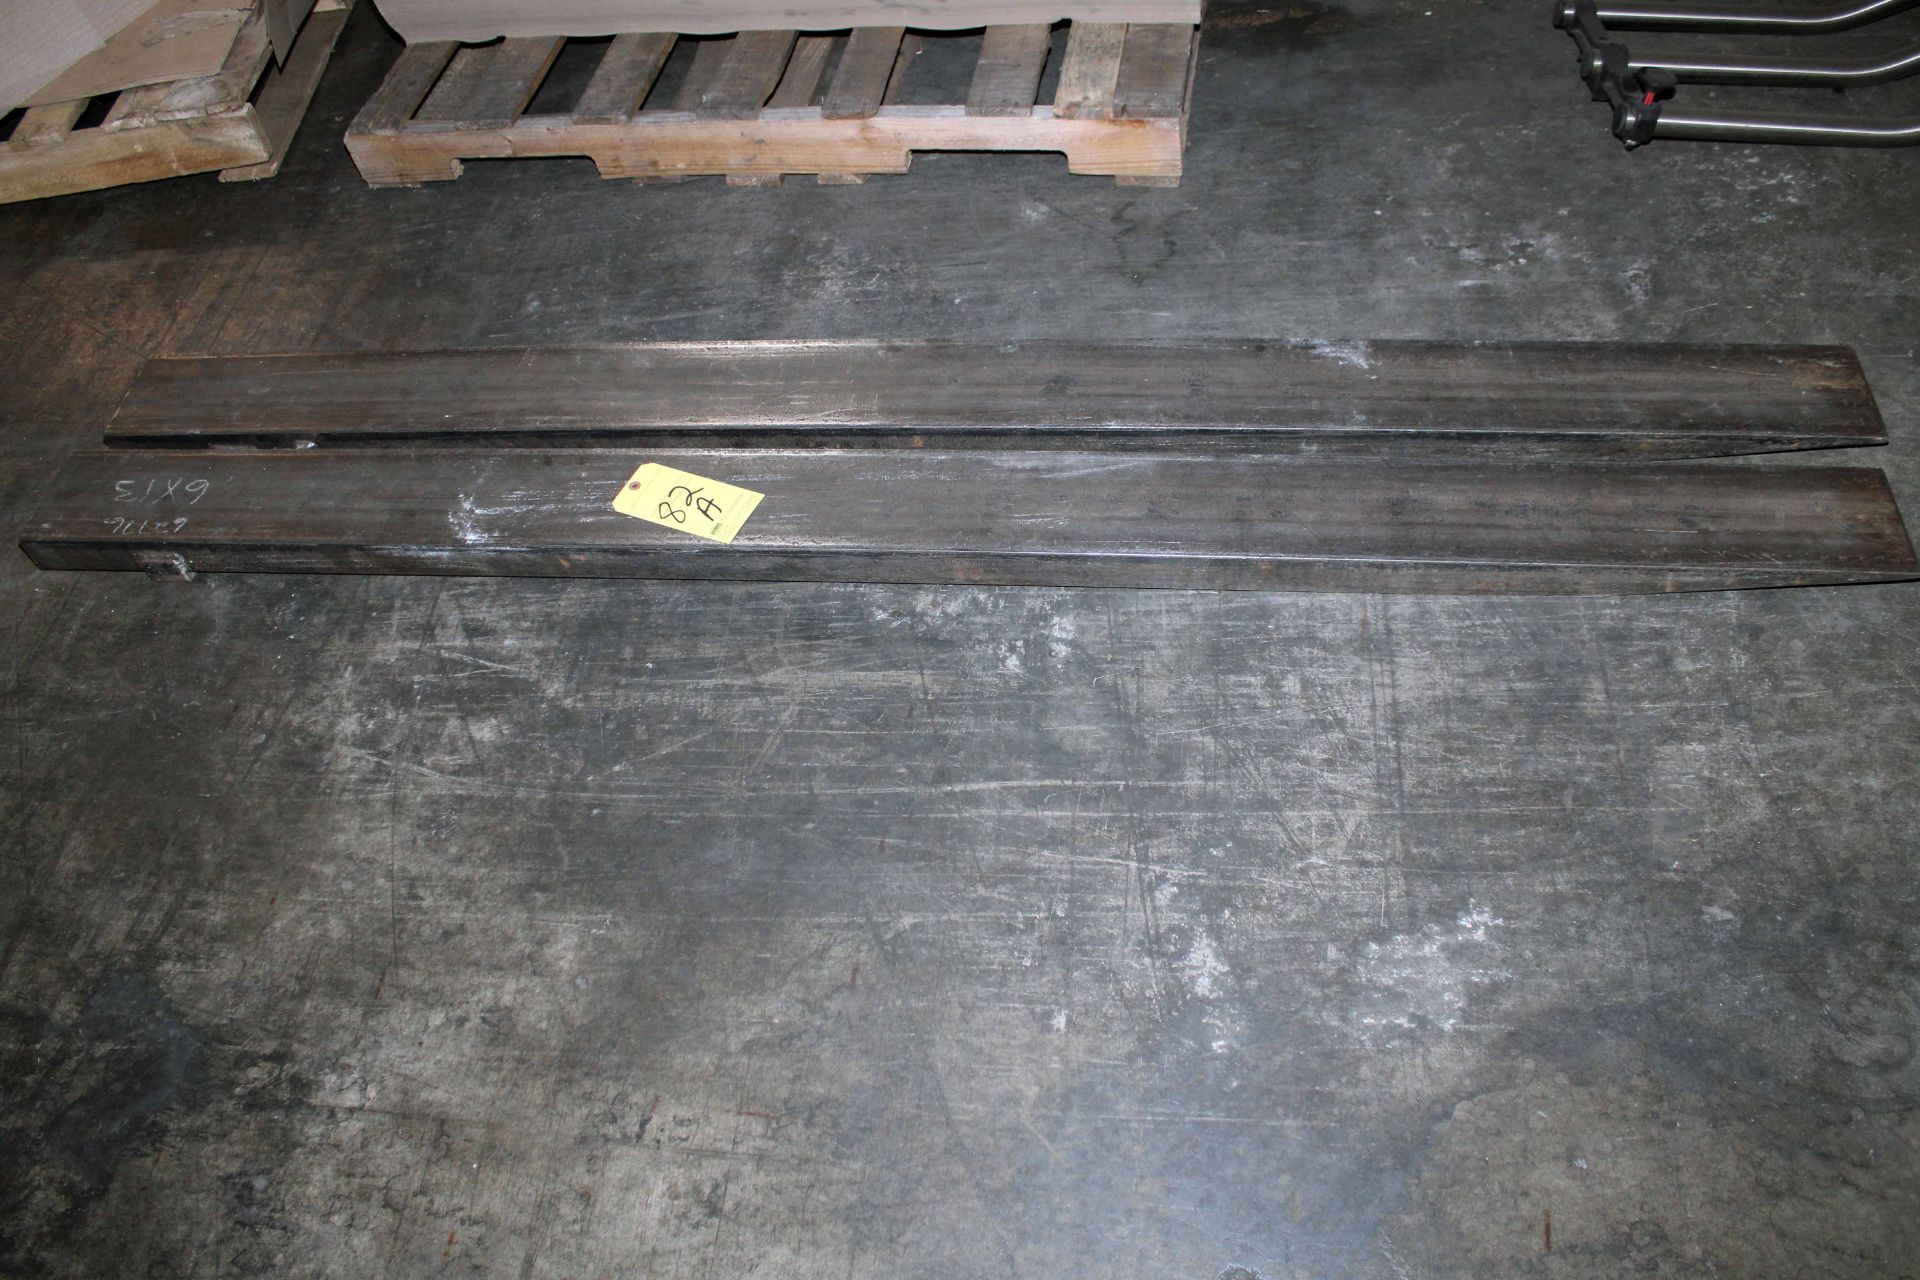 LOT OF FORKLIFT EXTENSIONS, 7'L.